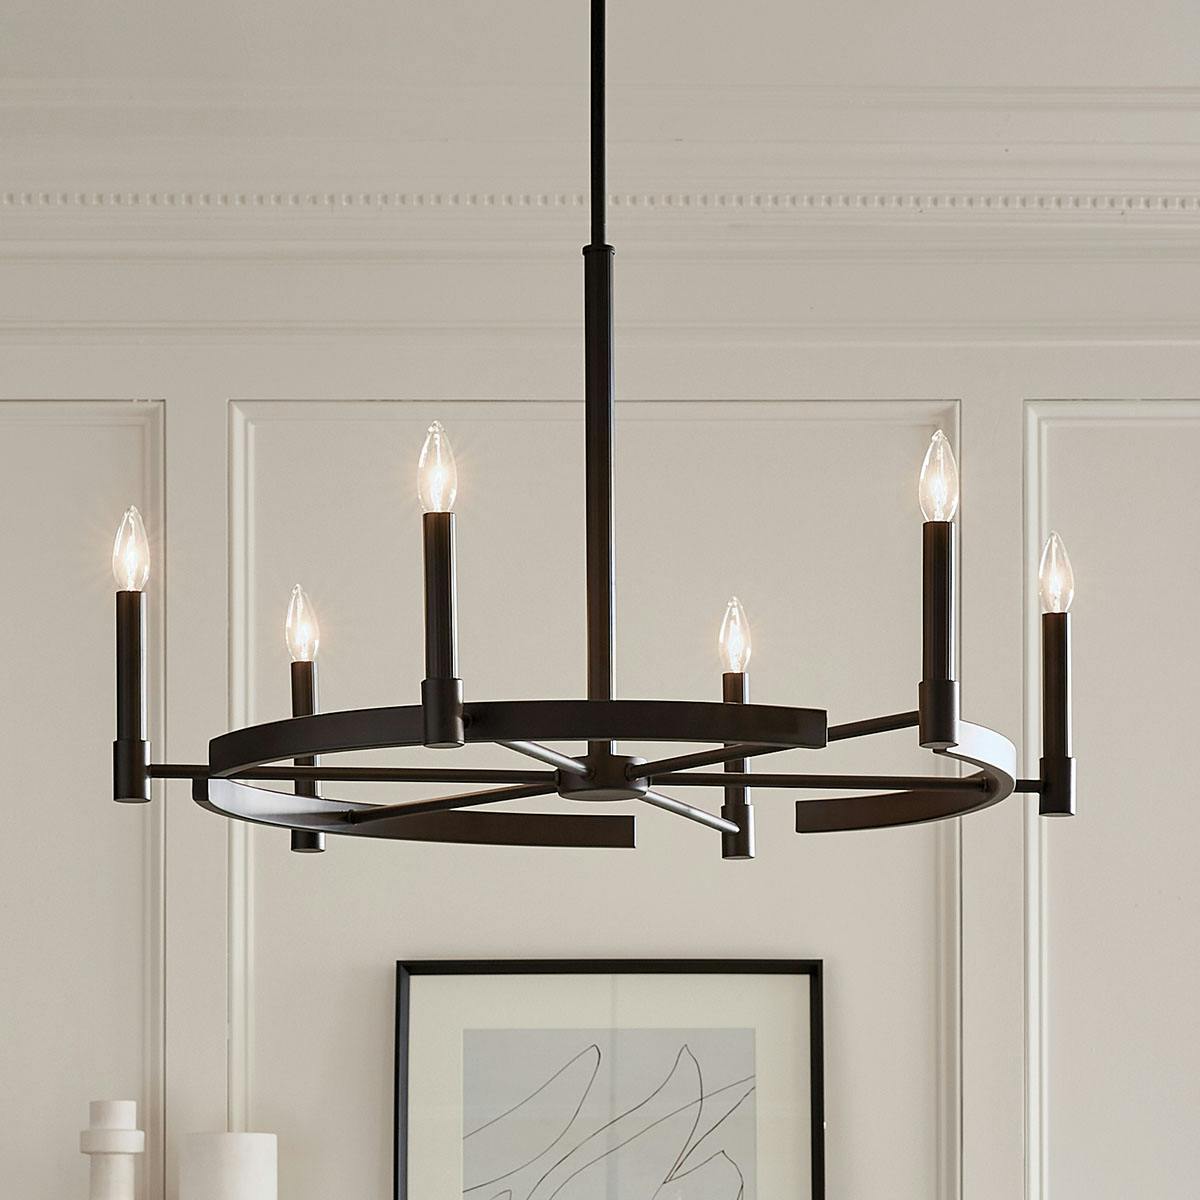 Day time Dining Room image featuring Tolani chandelier 52427BK